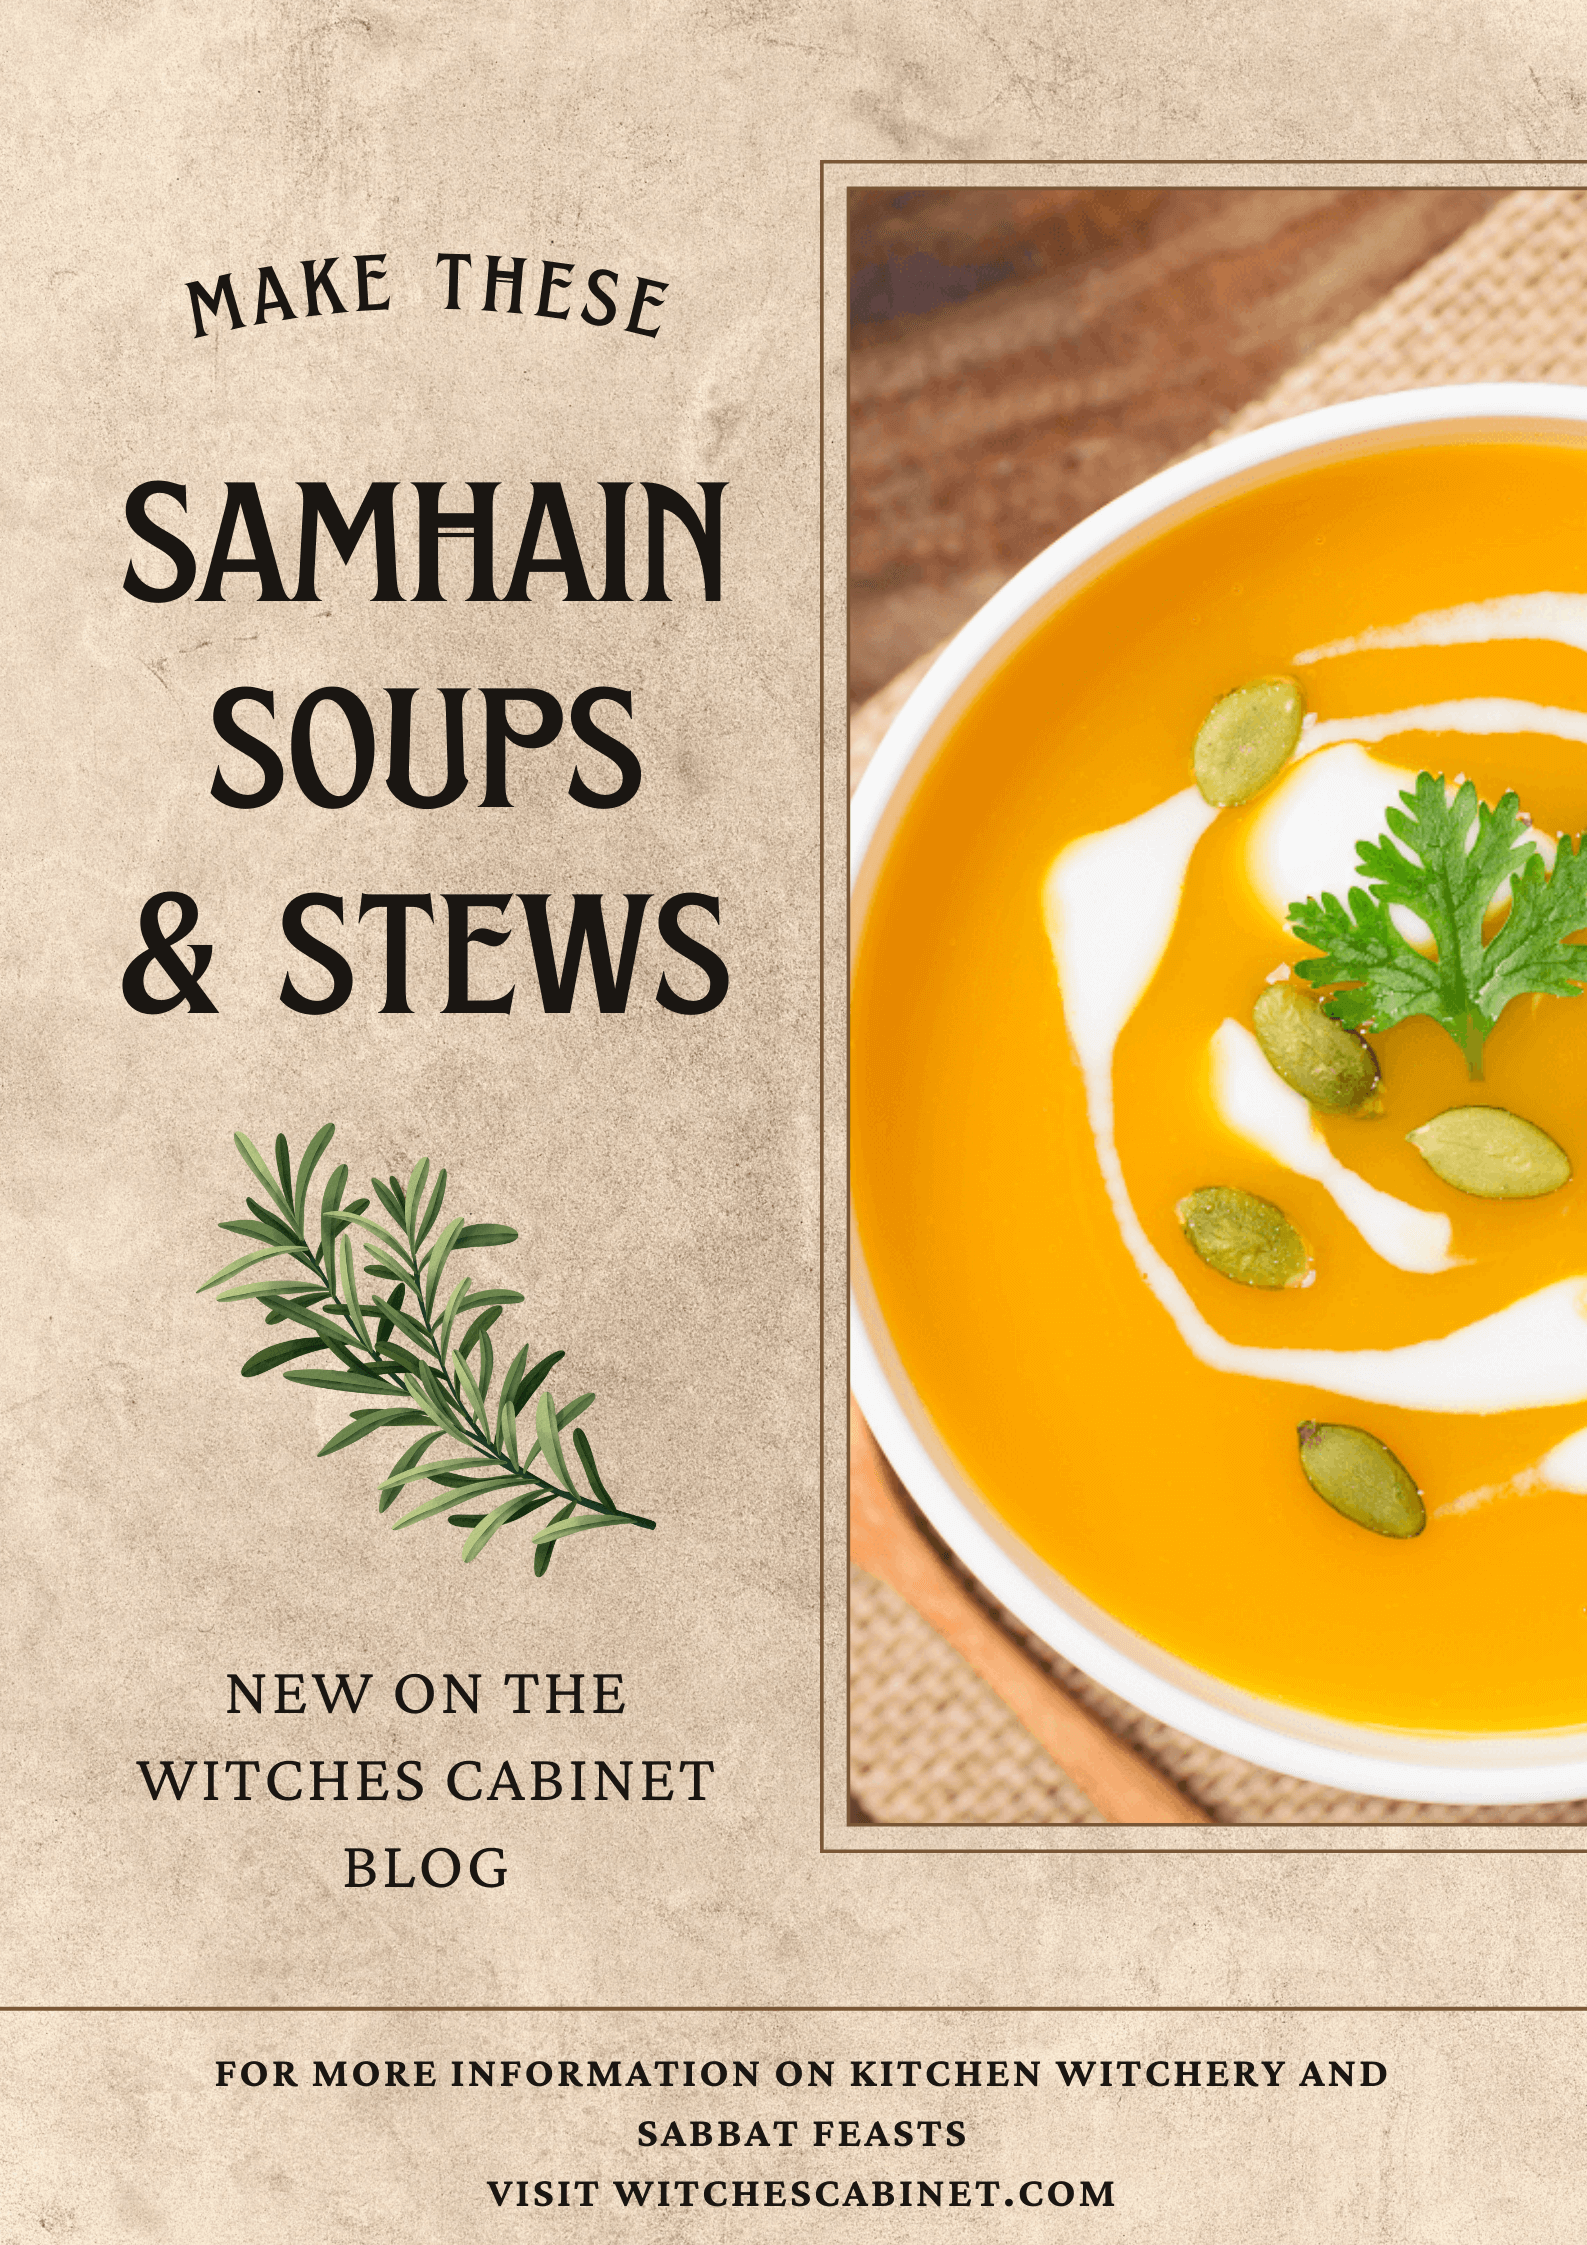 Samhain soups and stew recipes